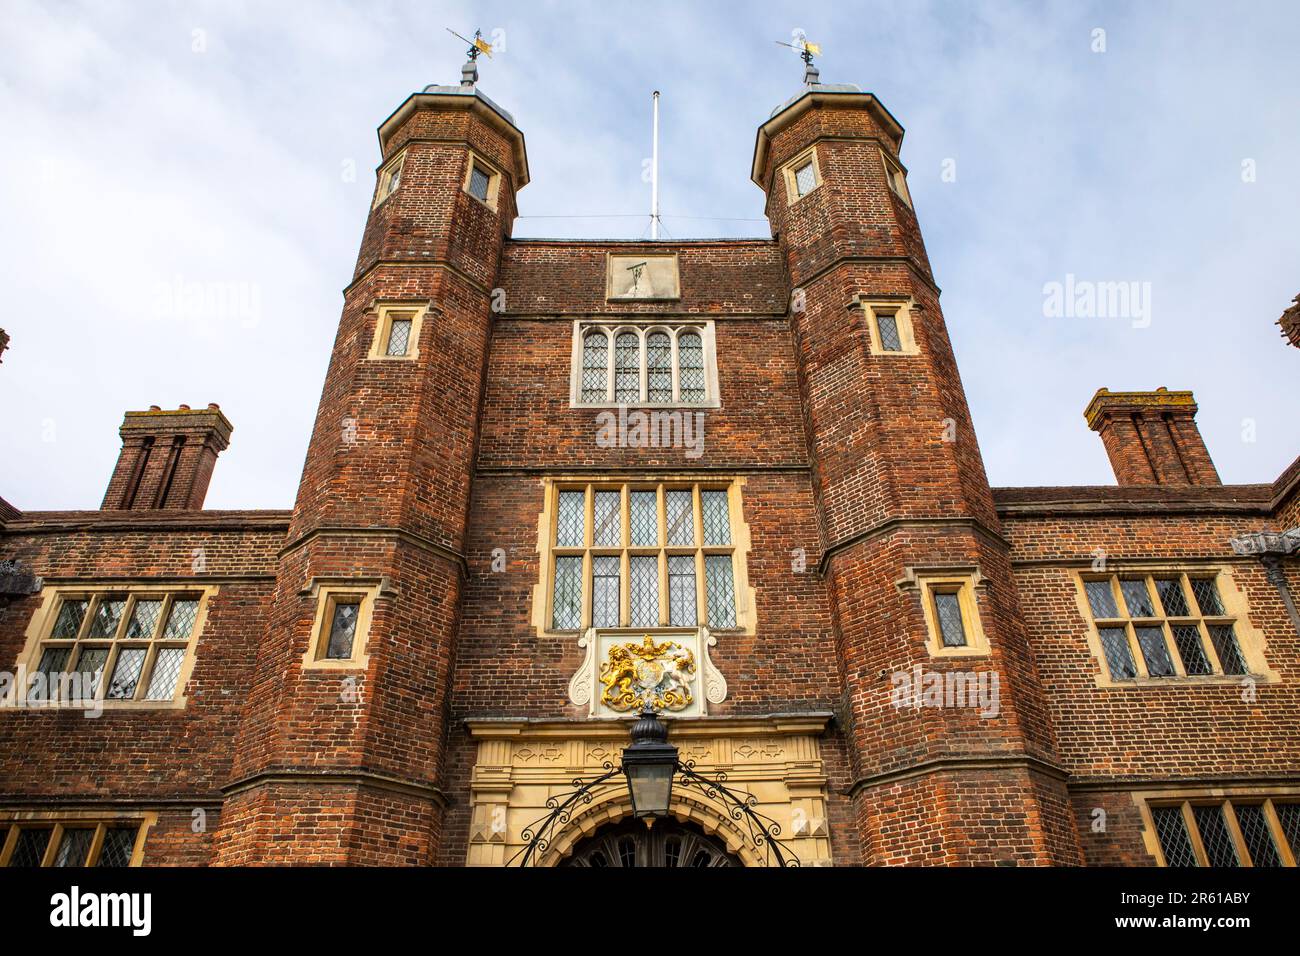 The beautiful Jacobean-style architecture of Abbots Hospital in the town of Guildford in Surrey, UK. Stock Photo